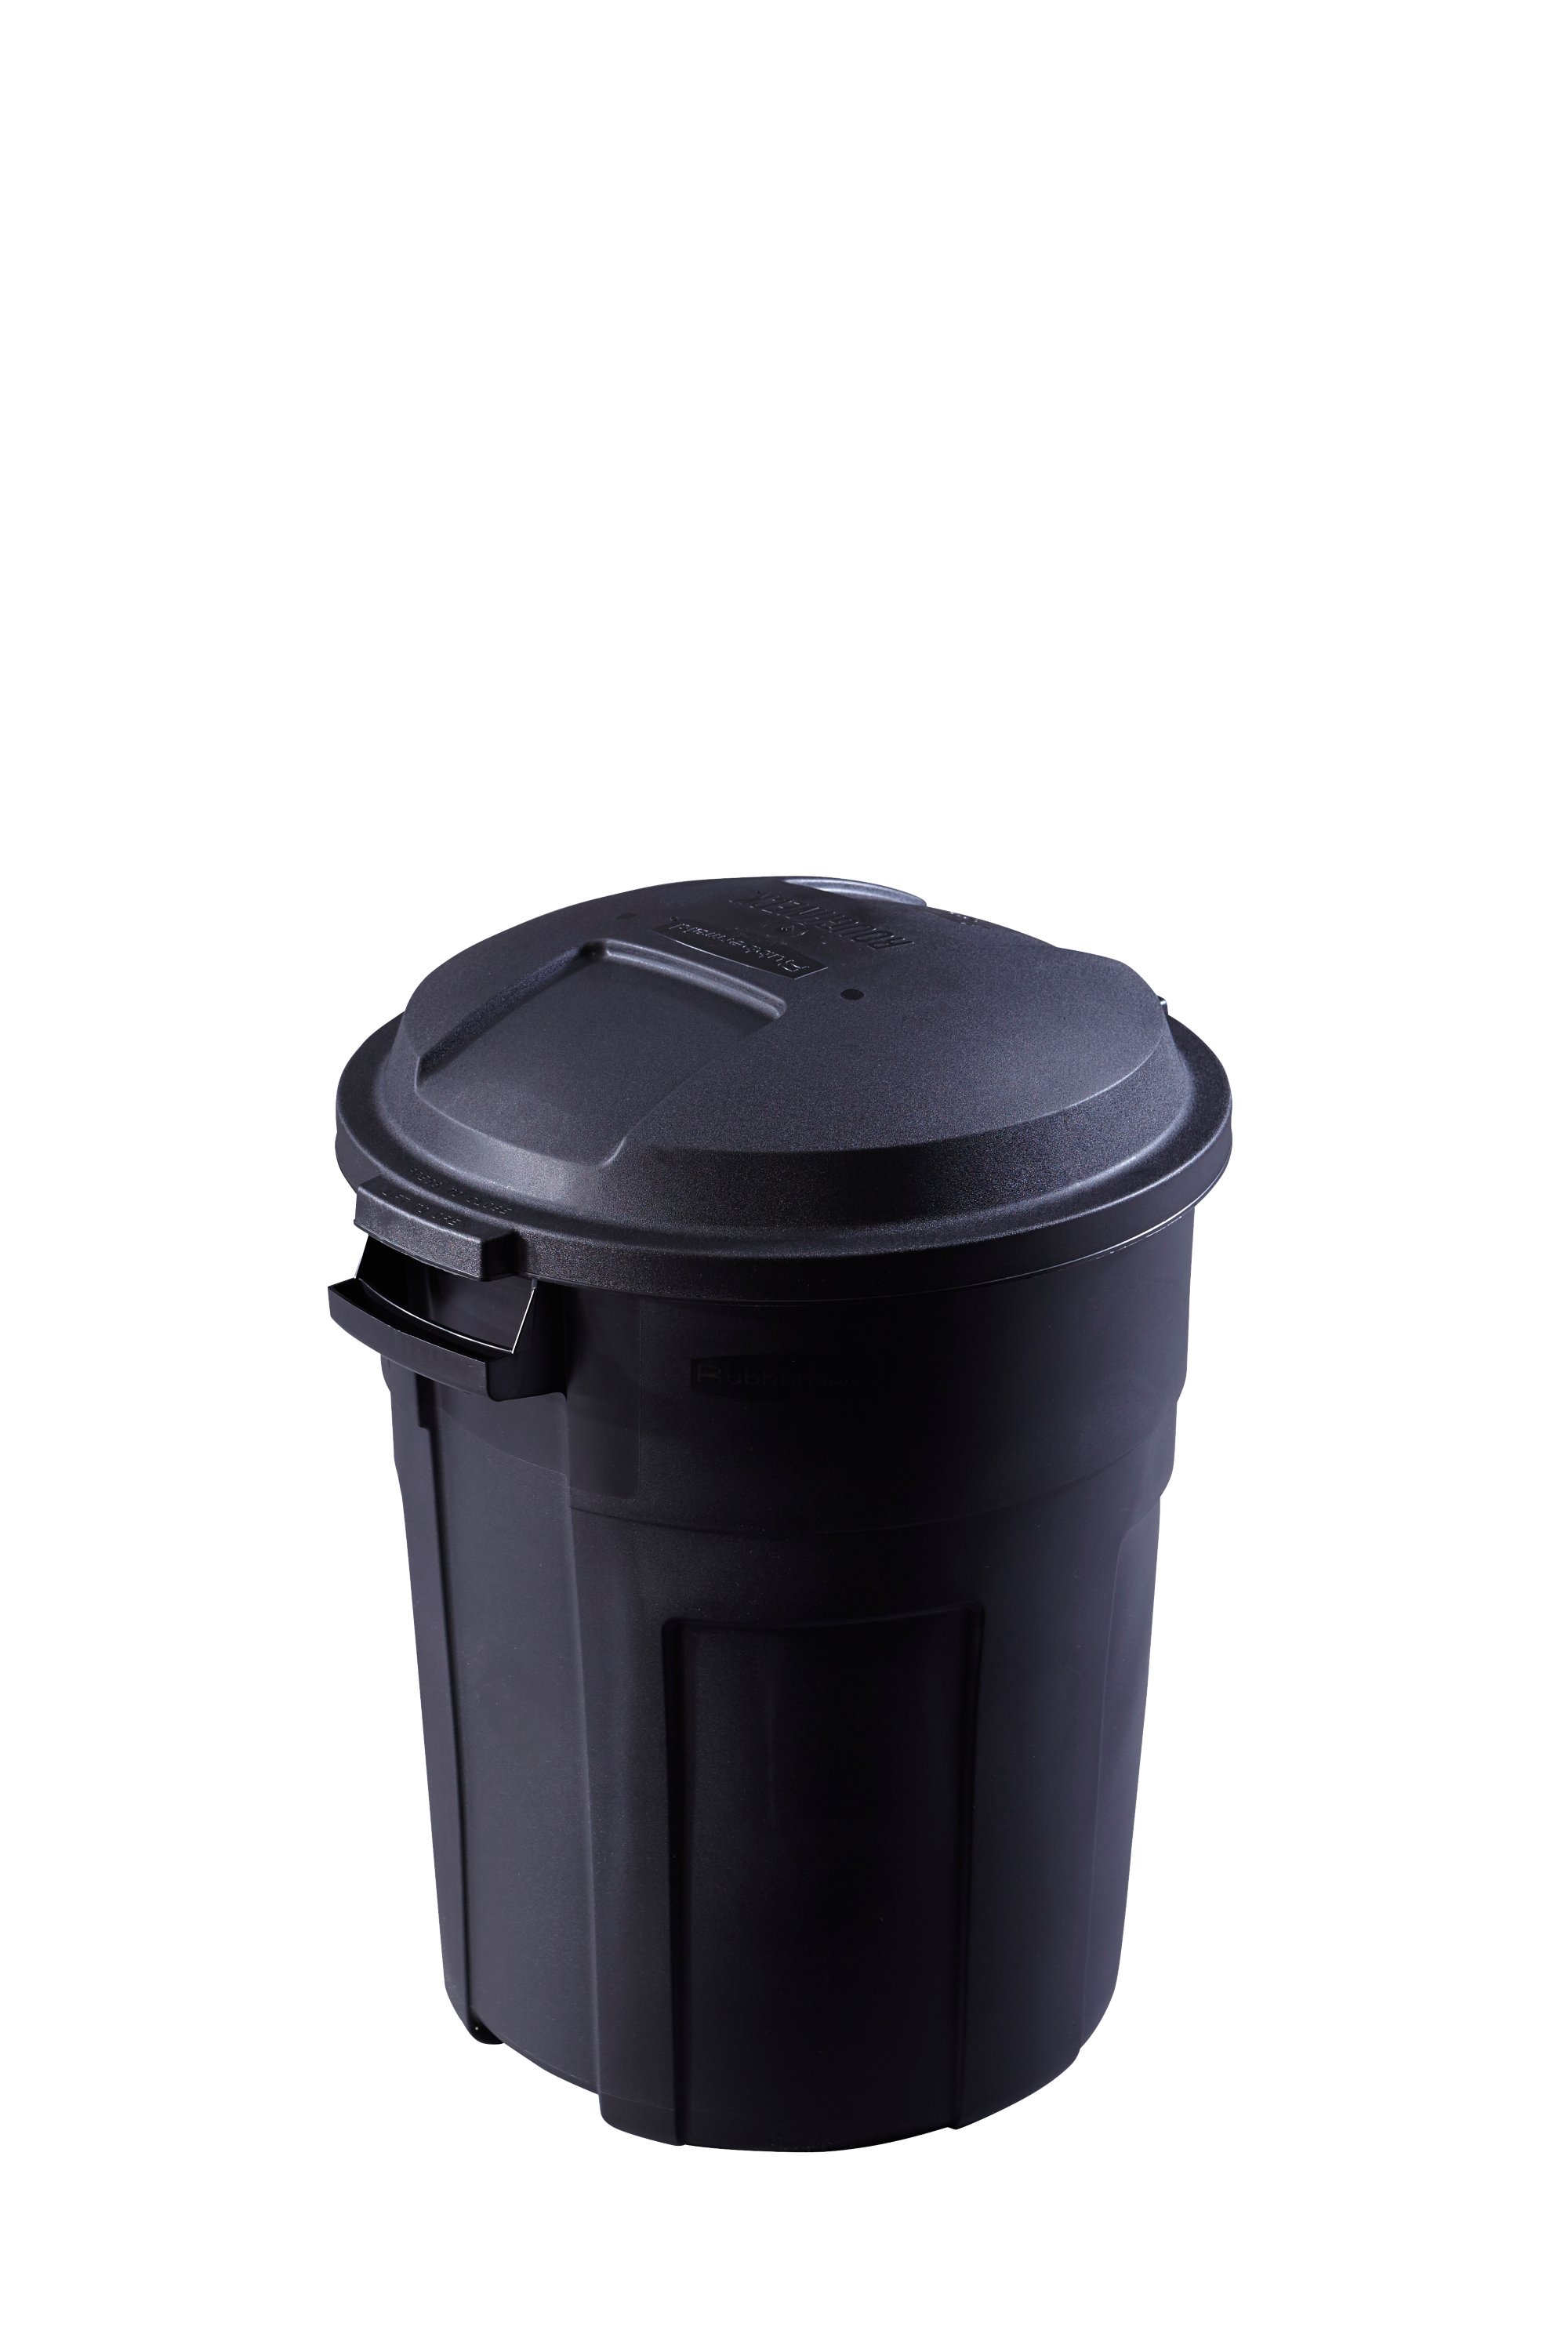 2) Rubbermaid Roughneck 32 gallon Round Trash Can with lid